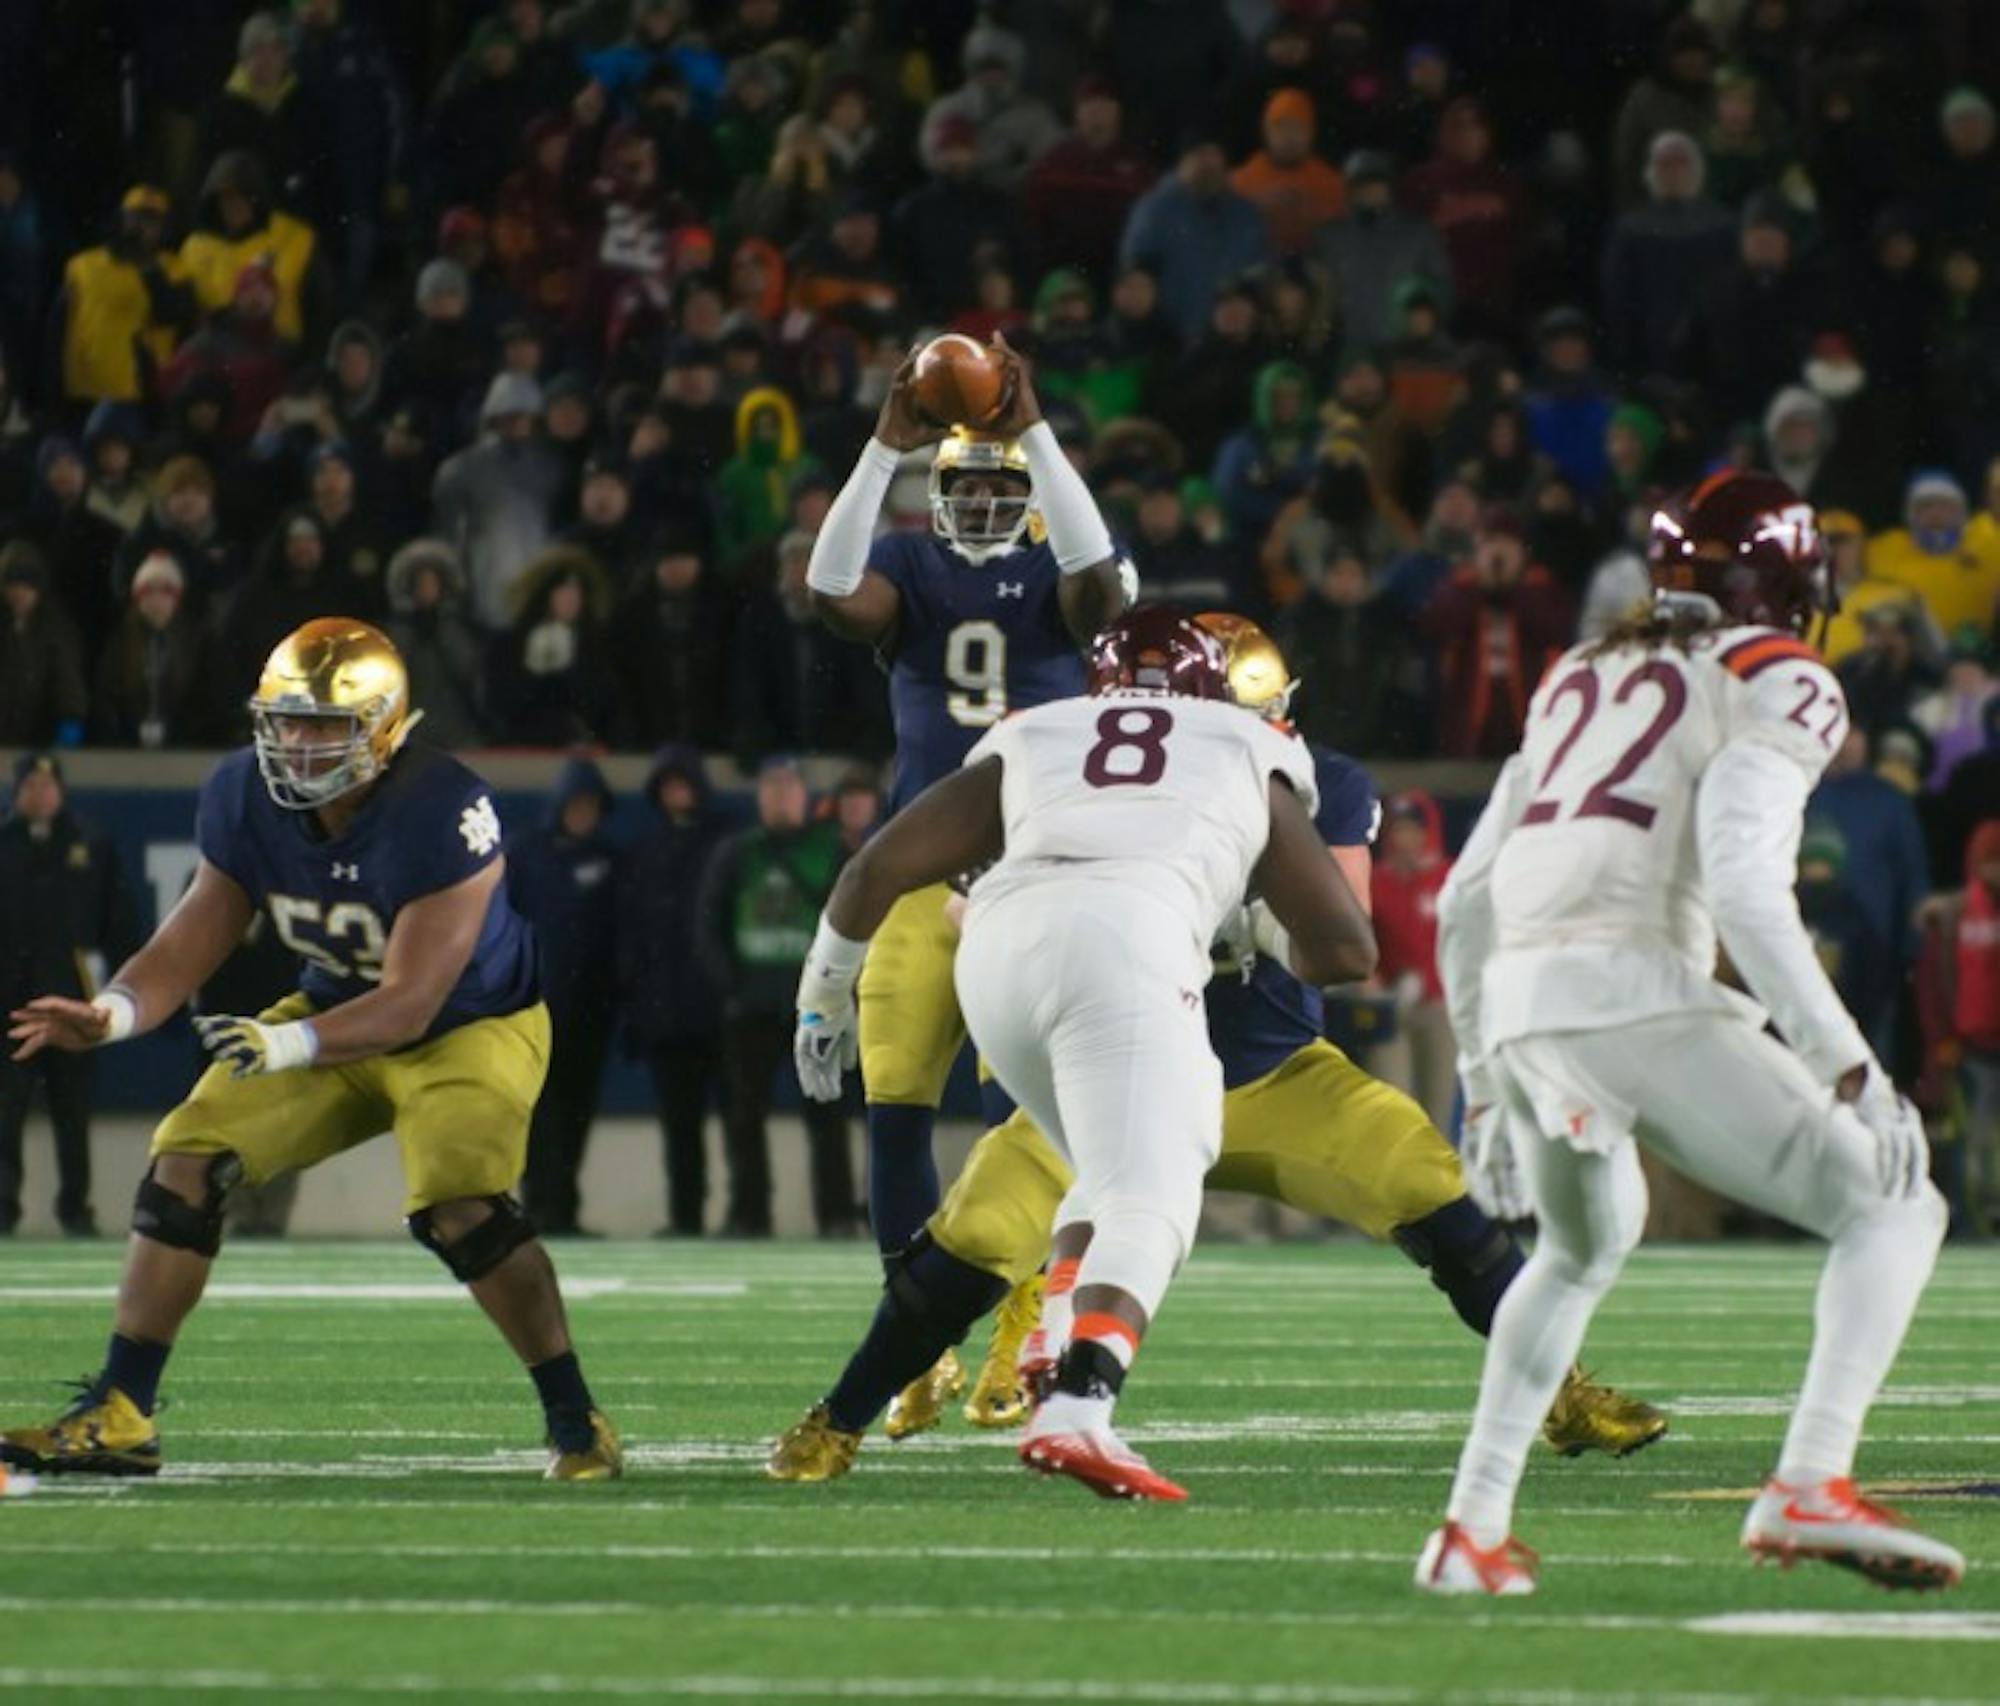 Irish senior quarterback Malik Zaire catches the snap in the final seconds of Notre Dame's 34-31 loss to Virginia Tech on Saturday.